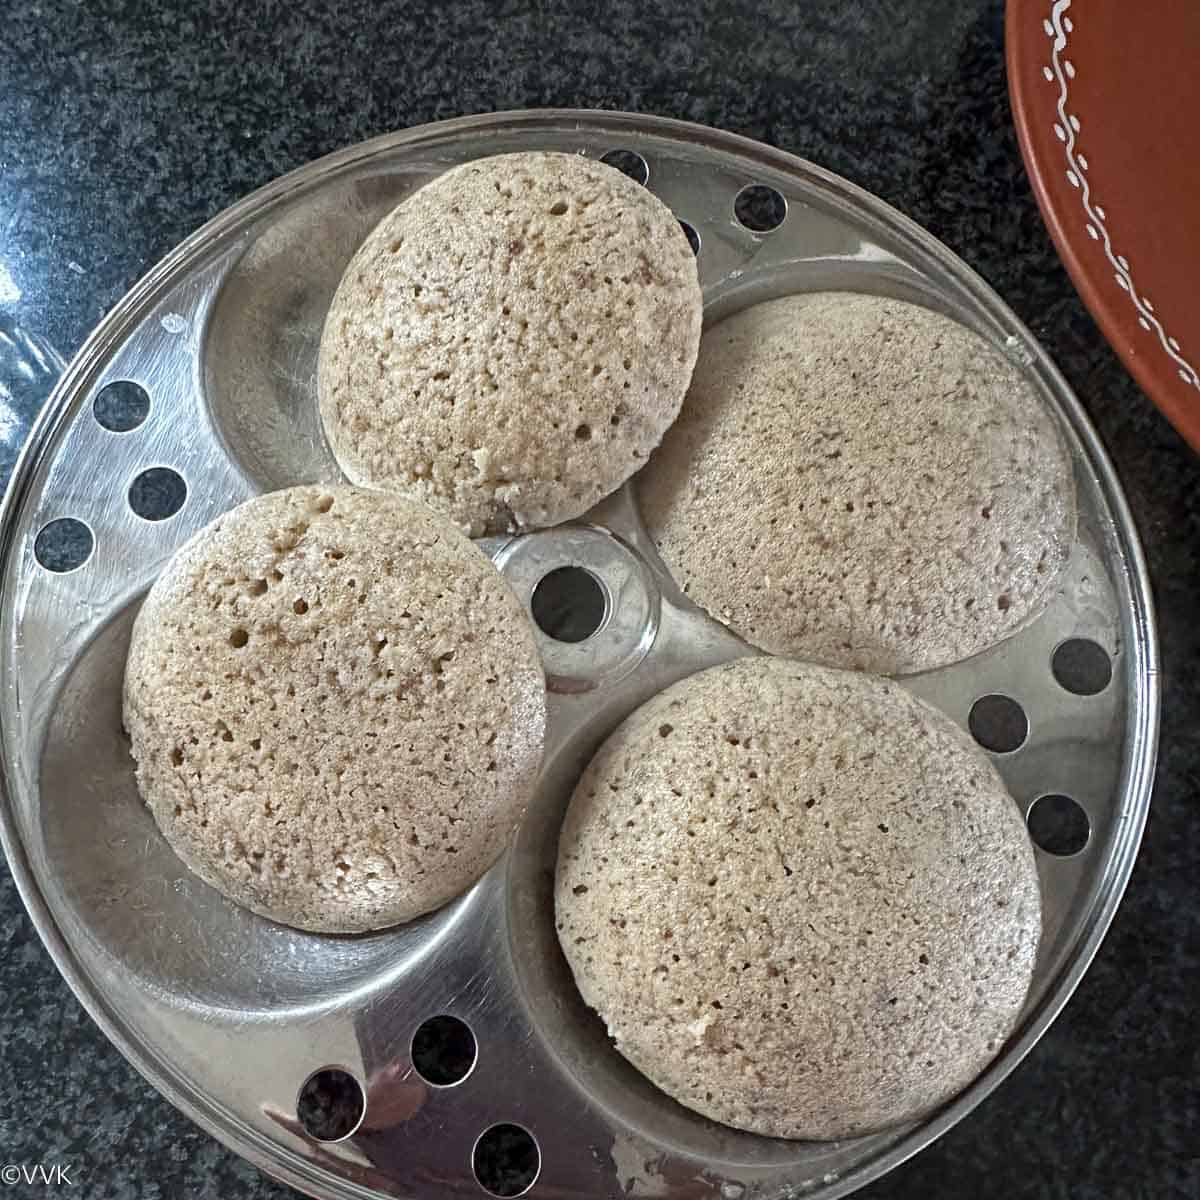 millet idli removed from the mold